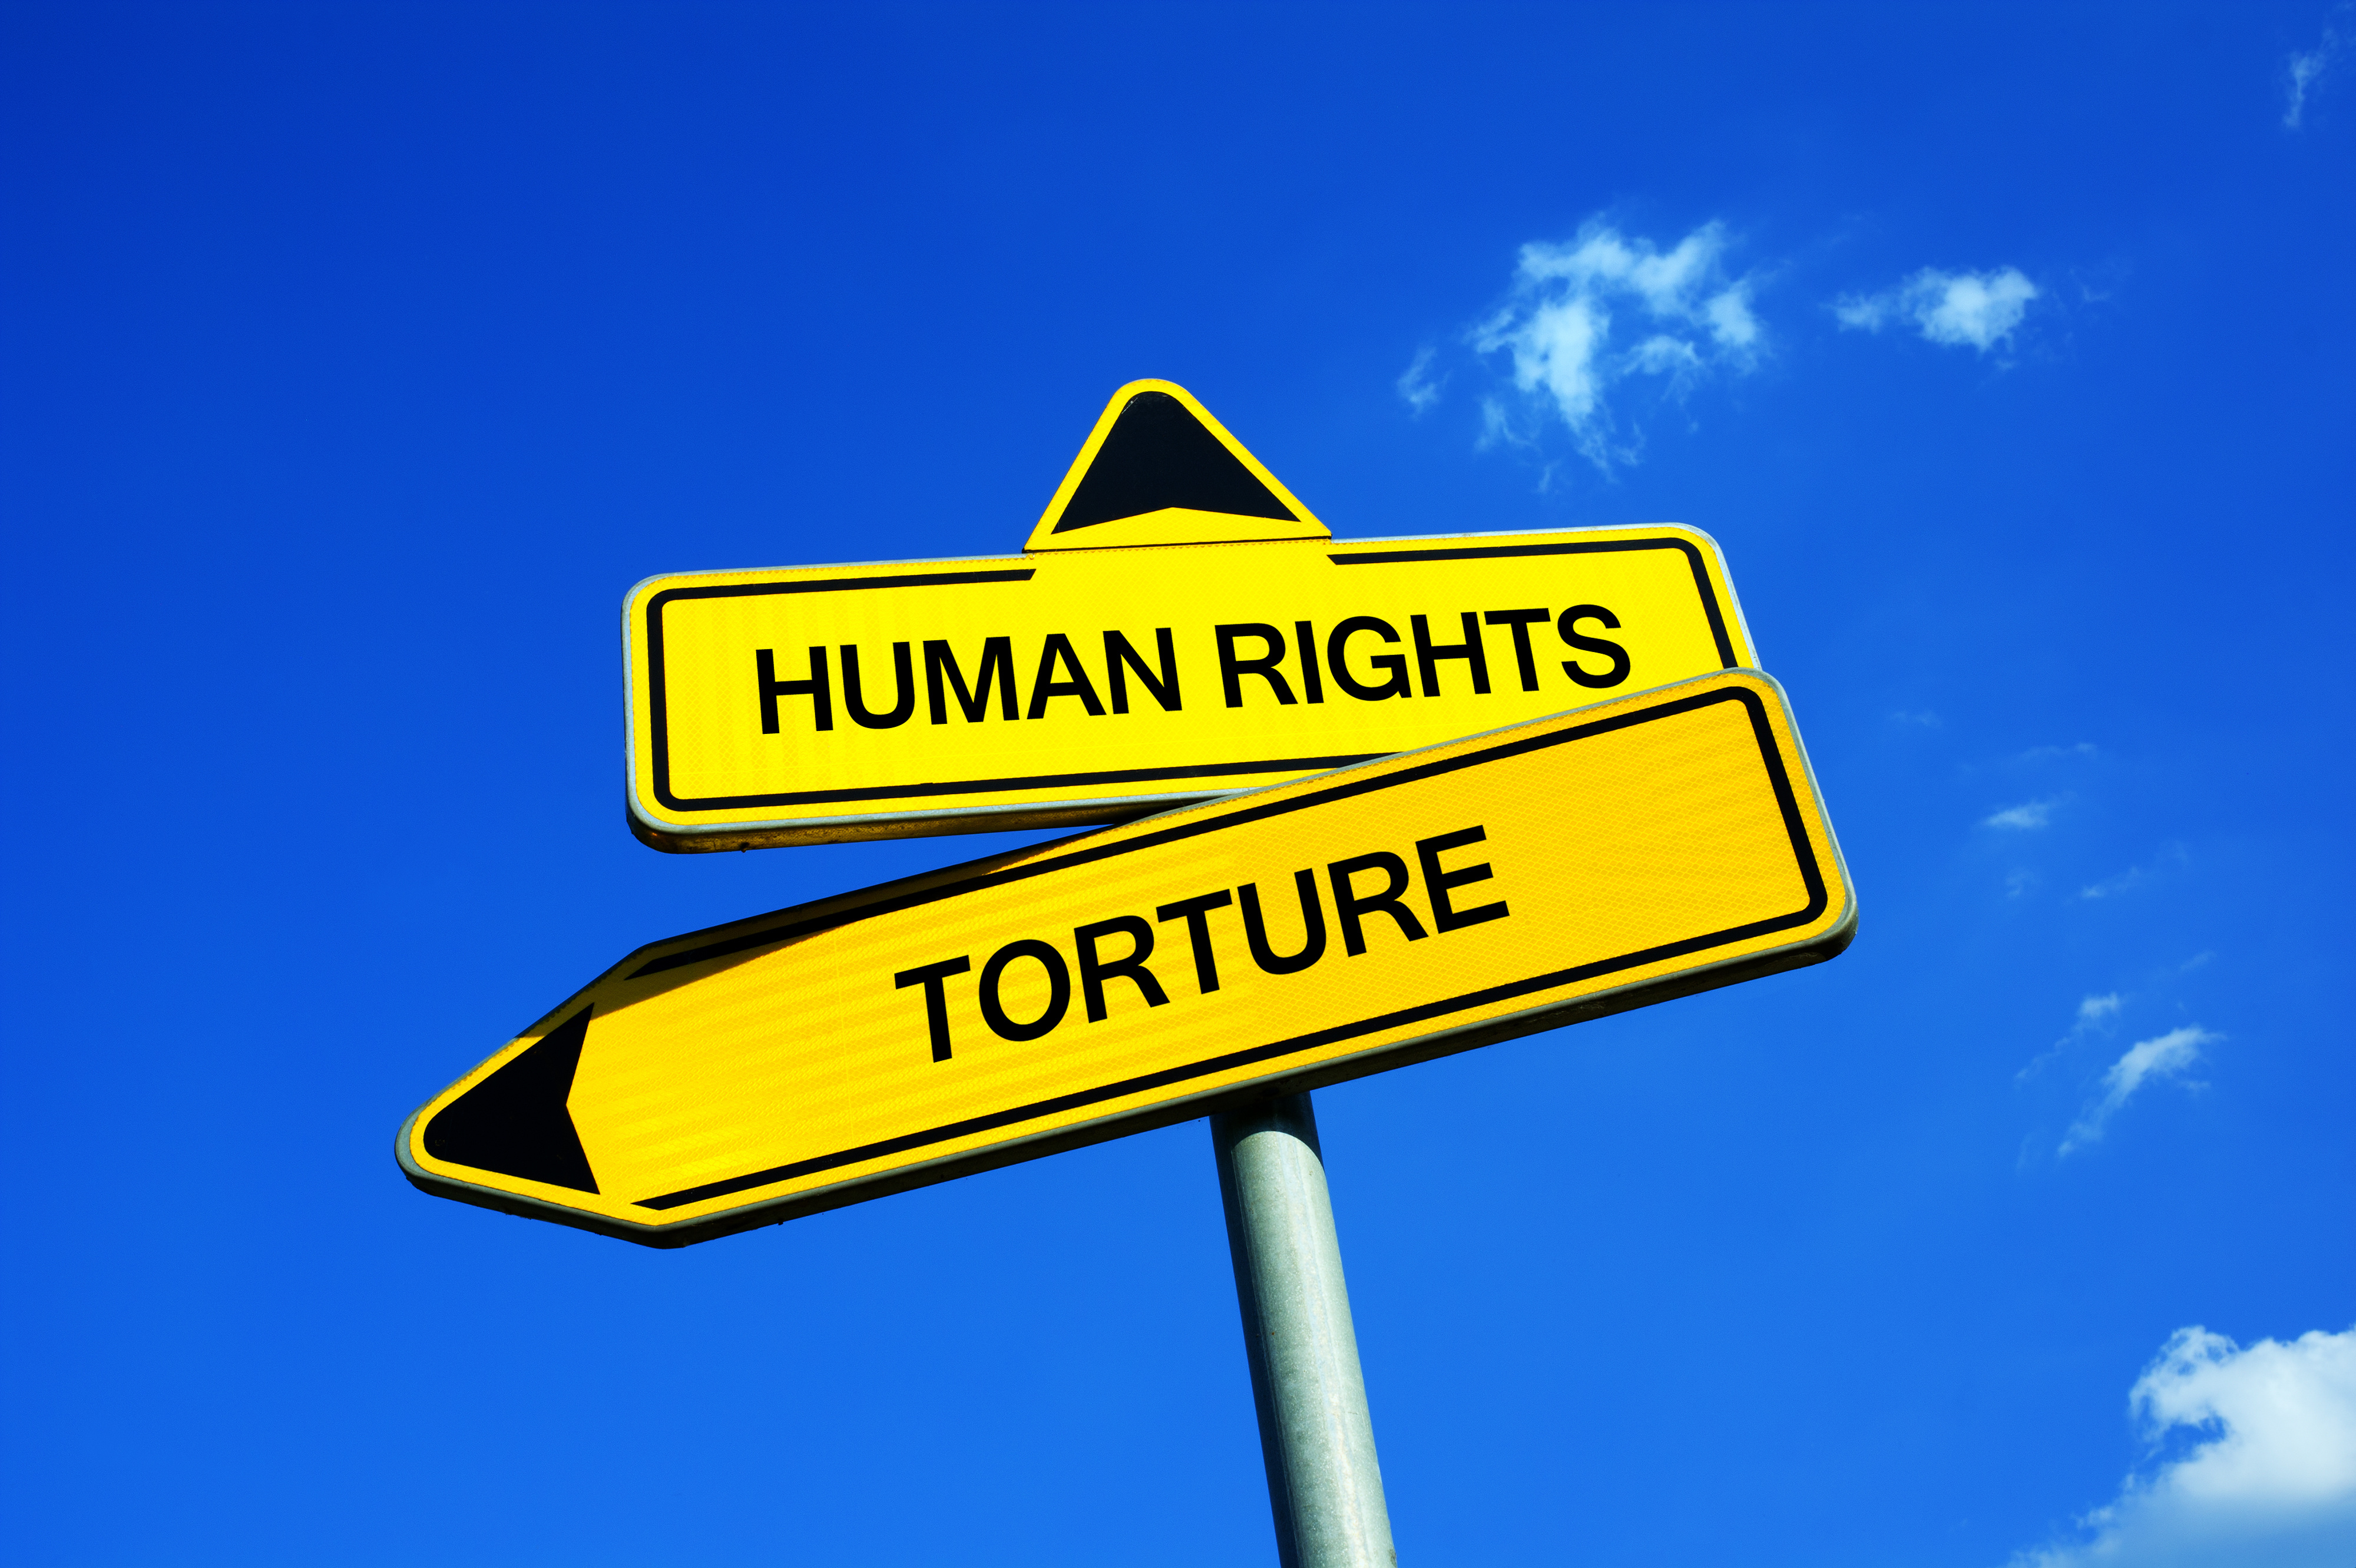 Human Rights or Torture - Traffic sign with two options - prohibition of inhuman degrading and treatment vs using brutal and cruel method during interrogation, questioning as method of prevention